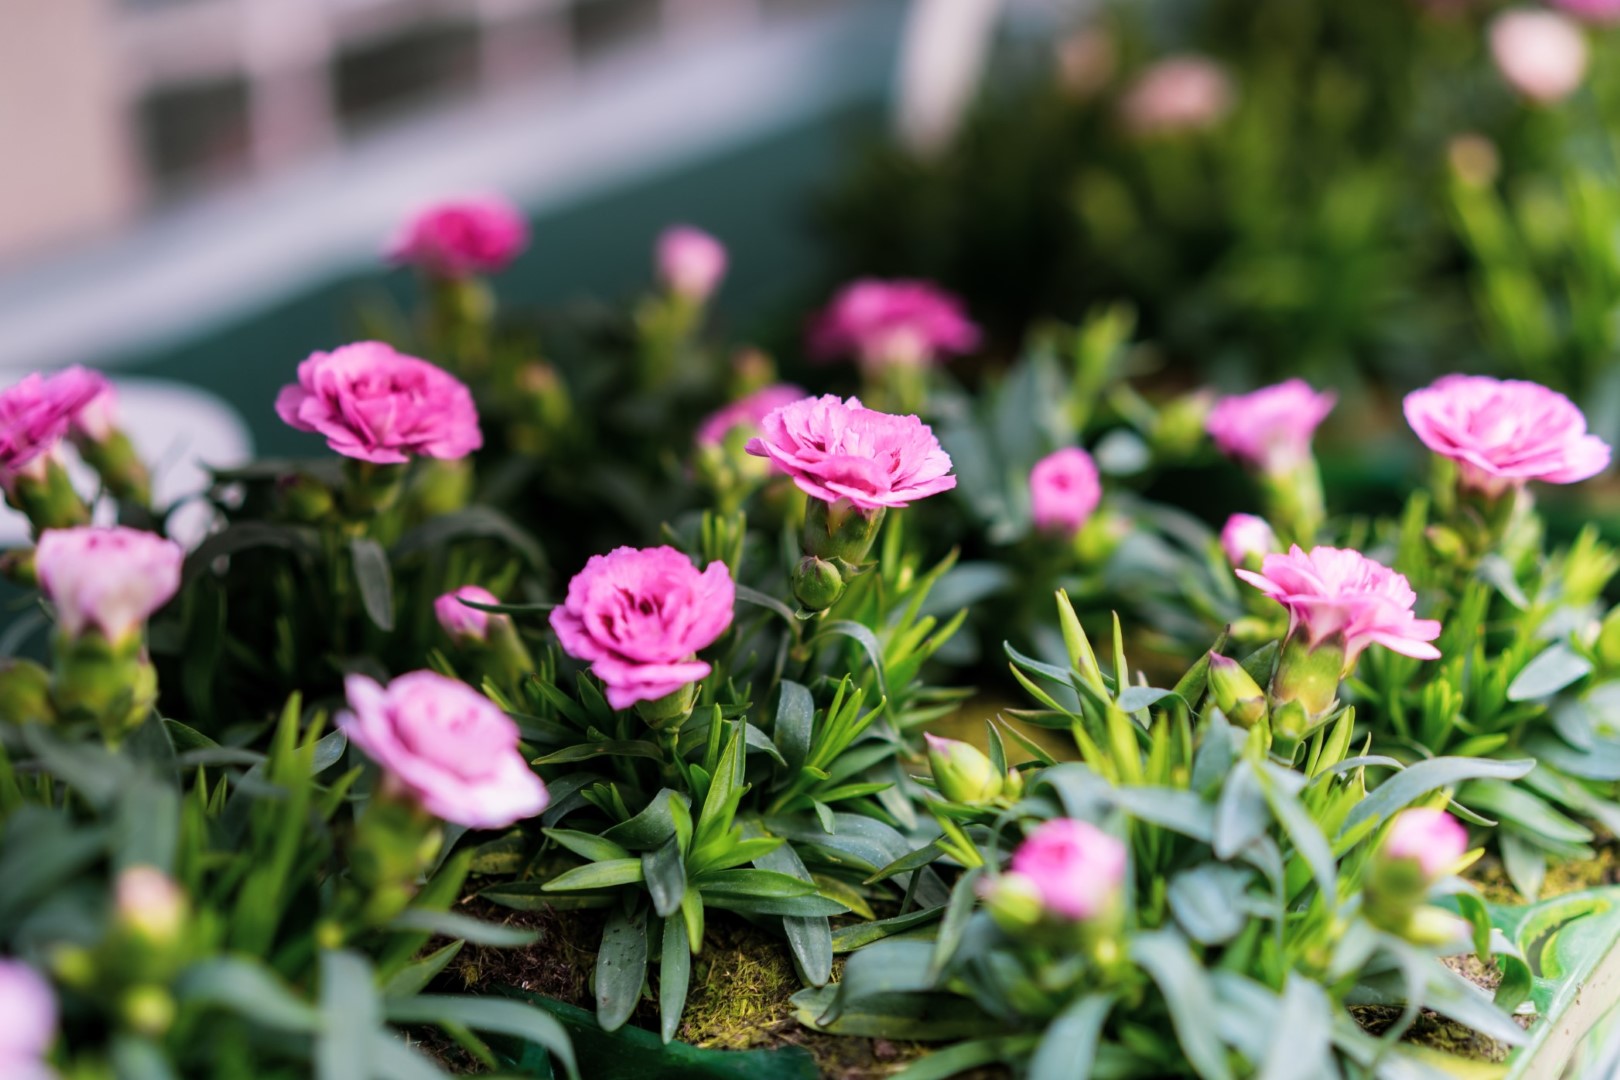 How to Grow and Care for Carnations